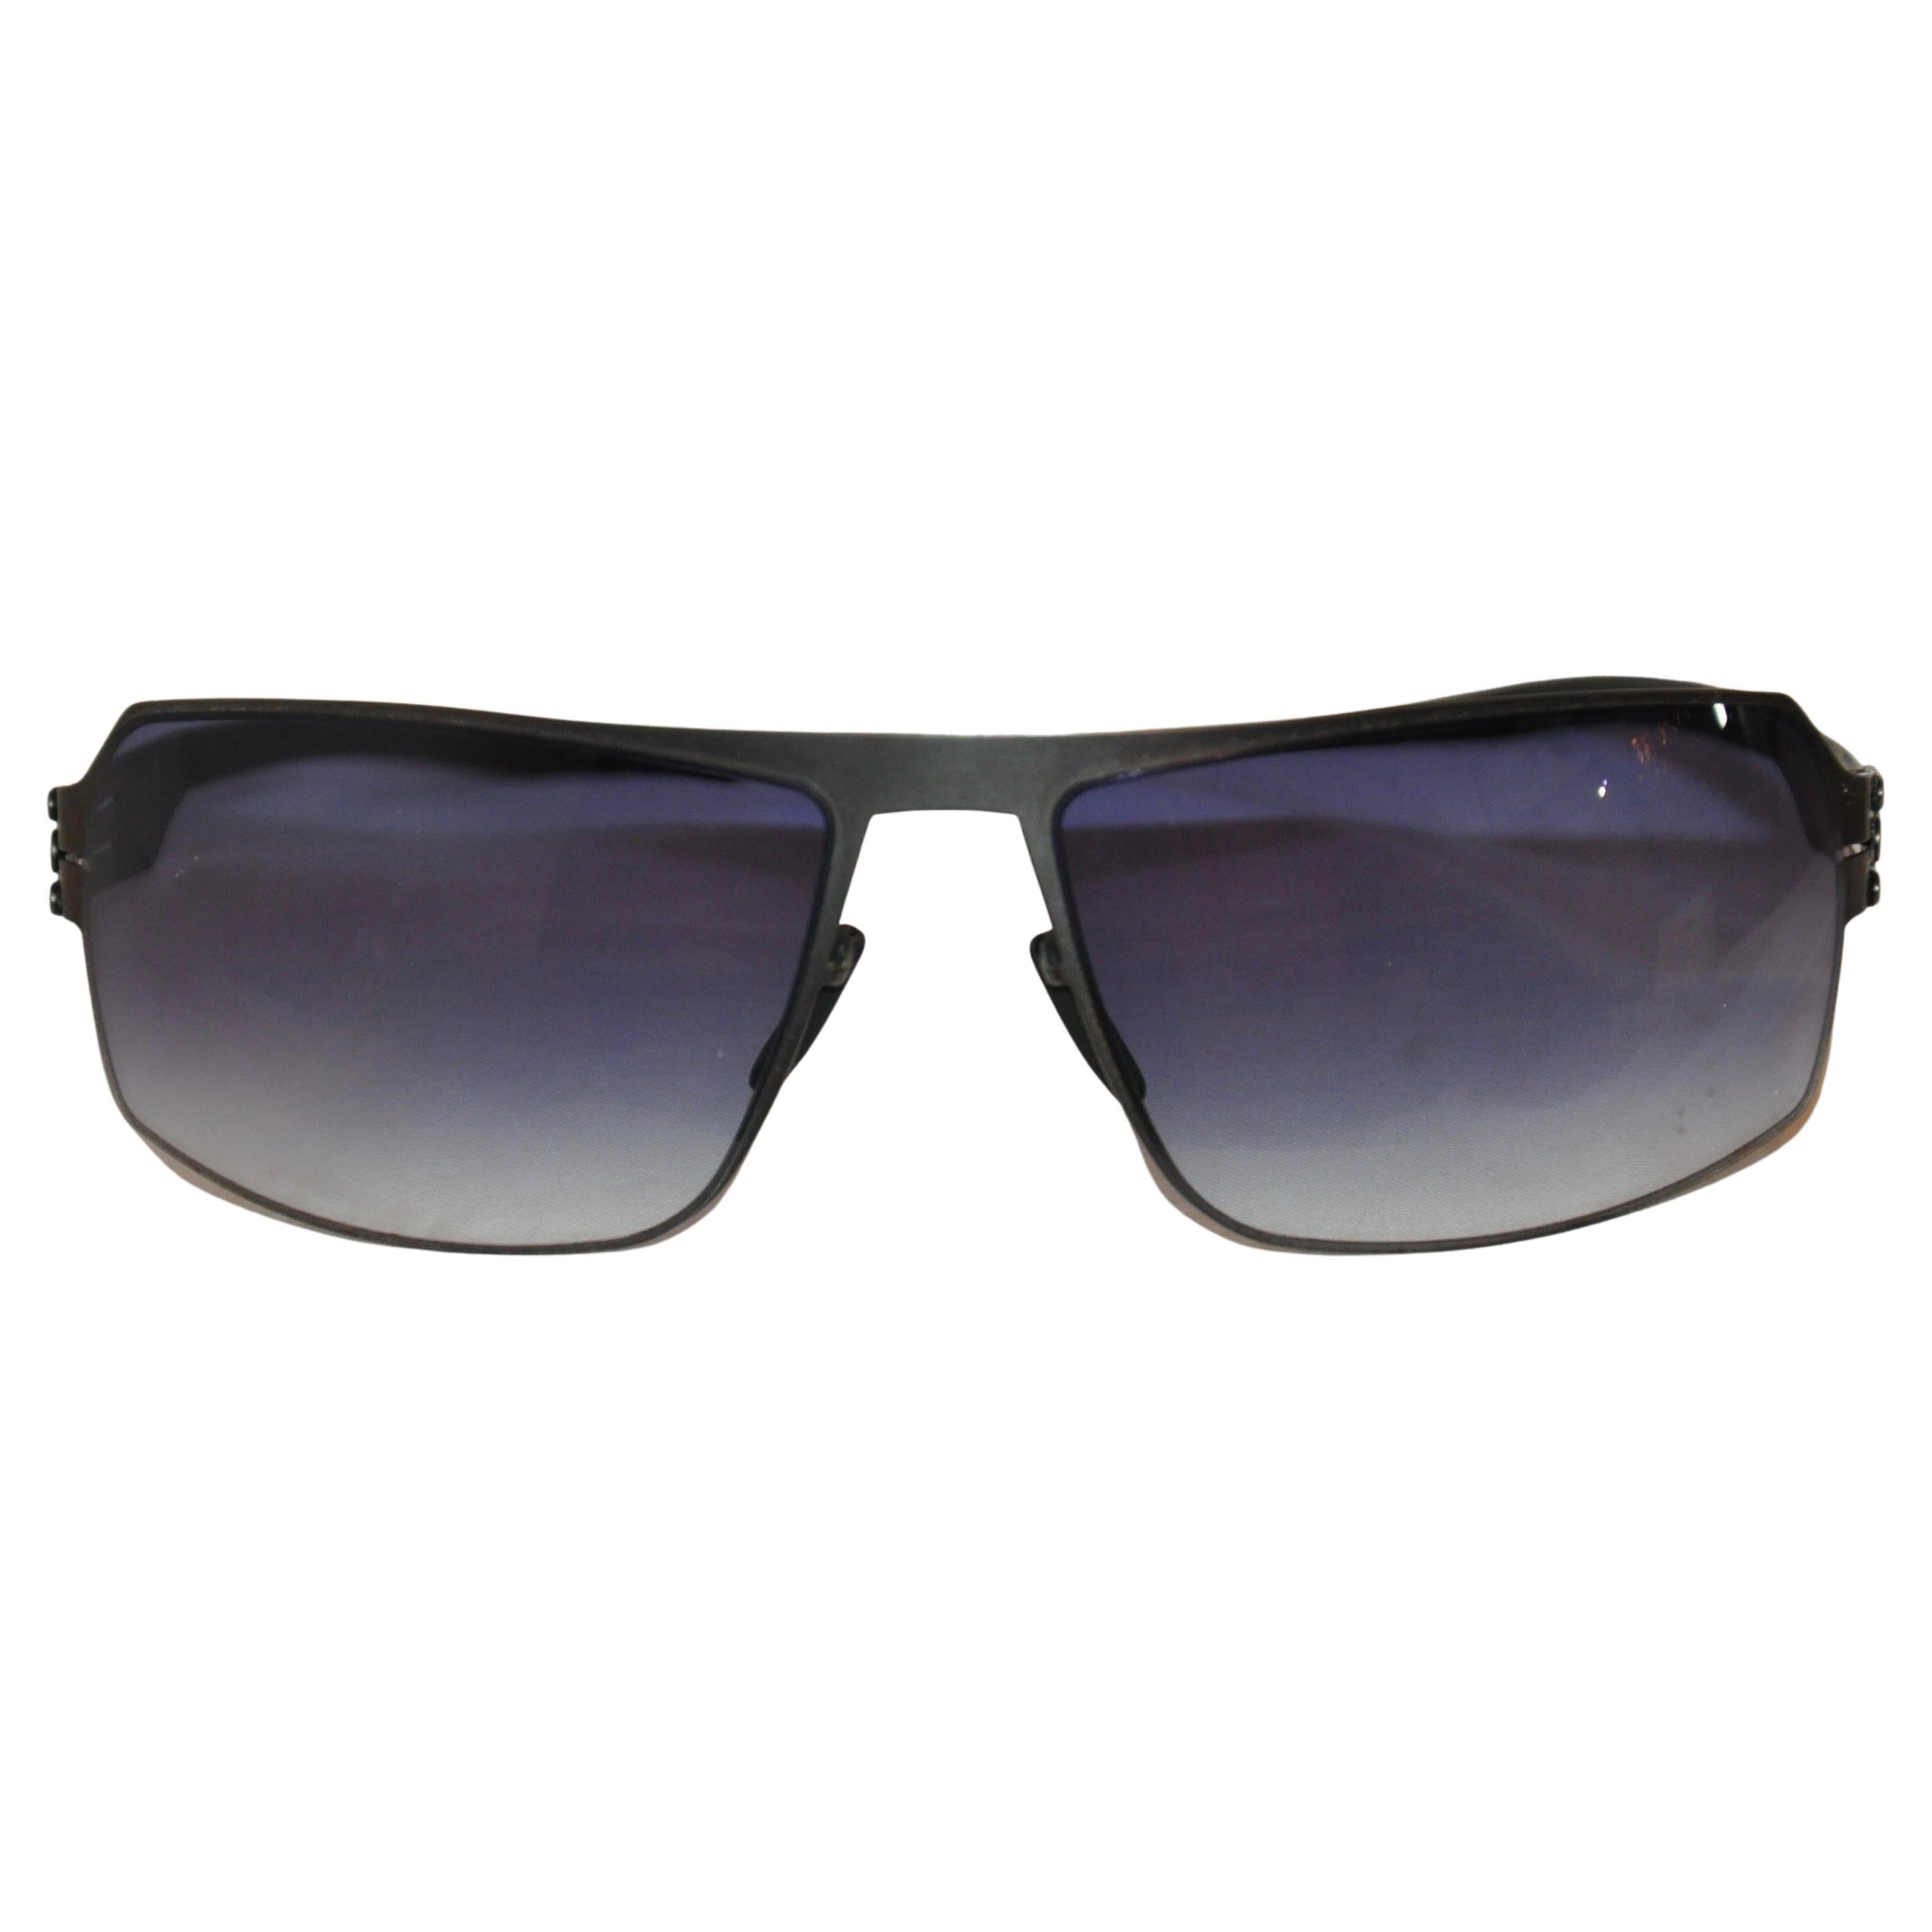 Ic! Berlin Black Curved-Styled Titanium Blue-Hue Sunglasses  For Sale